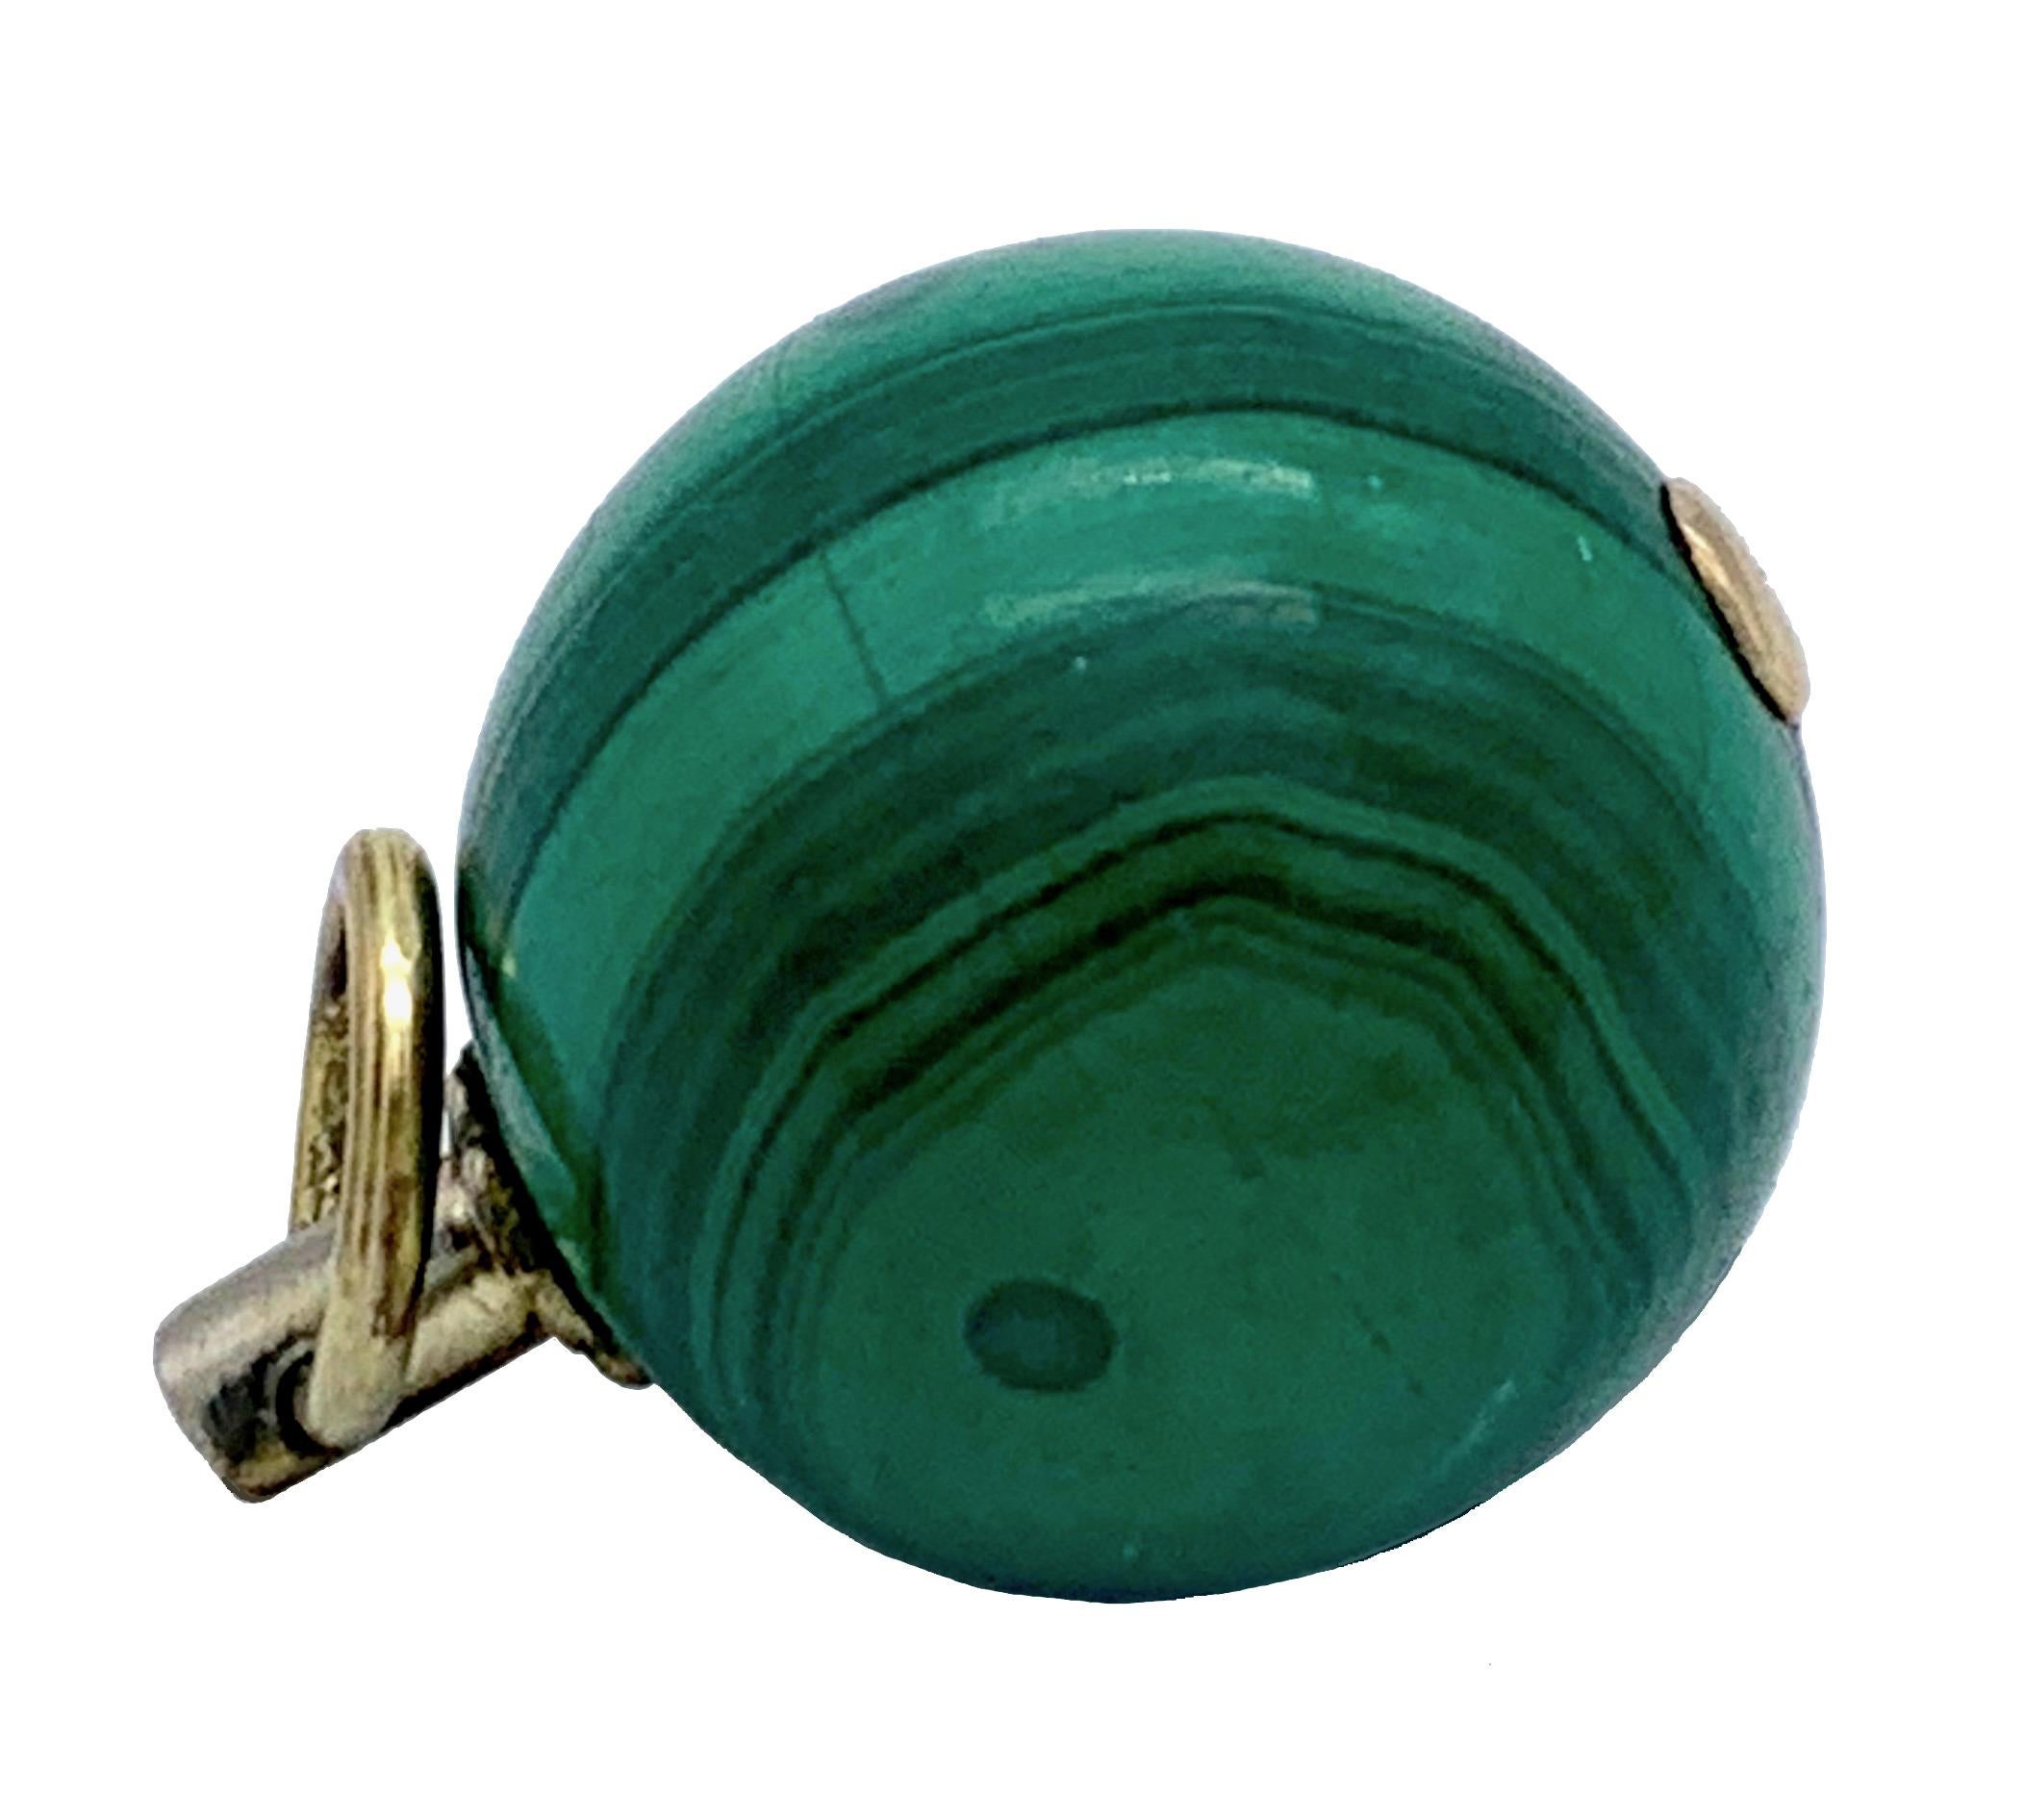 Antique 1825 English Watch Key Pendant Malachite Ball Silver Gilt Metal  In Good Condition For Sale In Munich, Bavaria